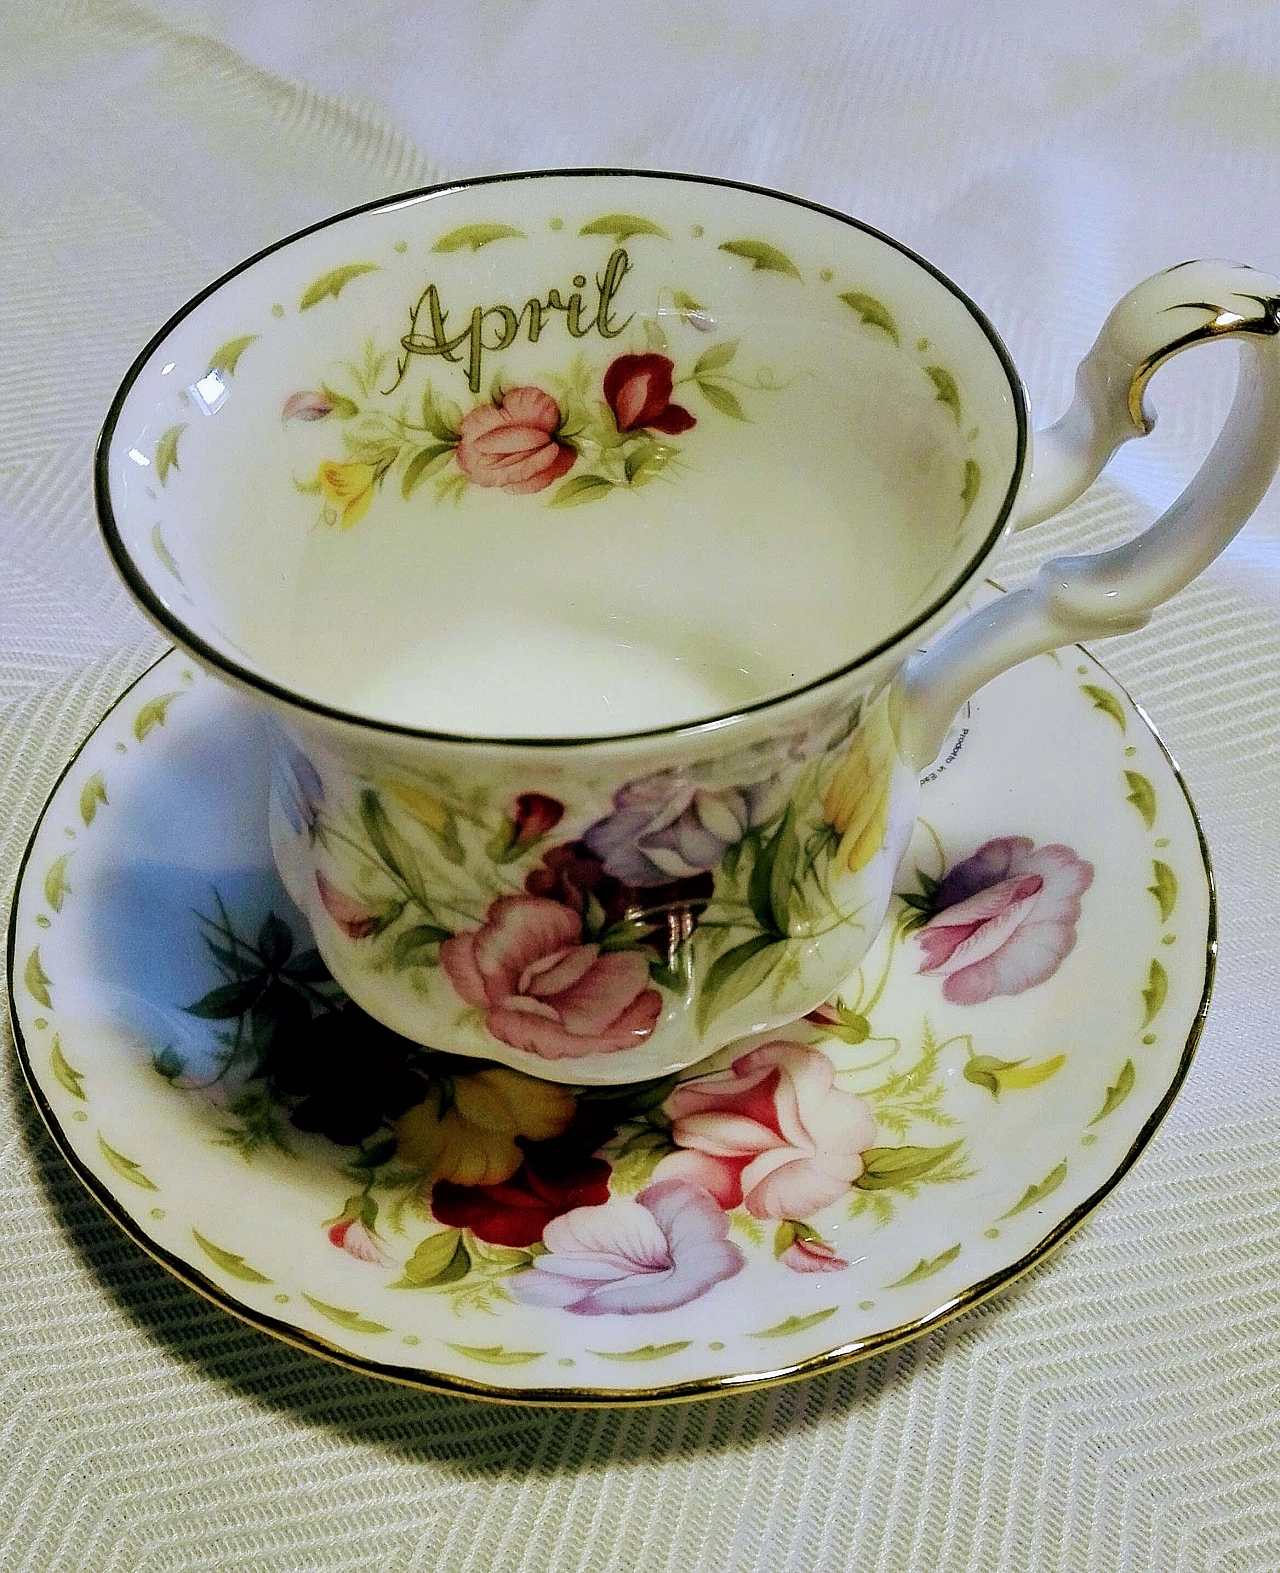 Cup April from Royal Albert in porcelain 1155338